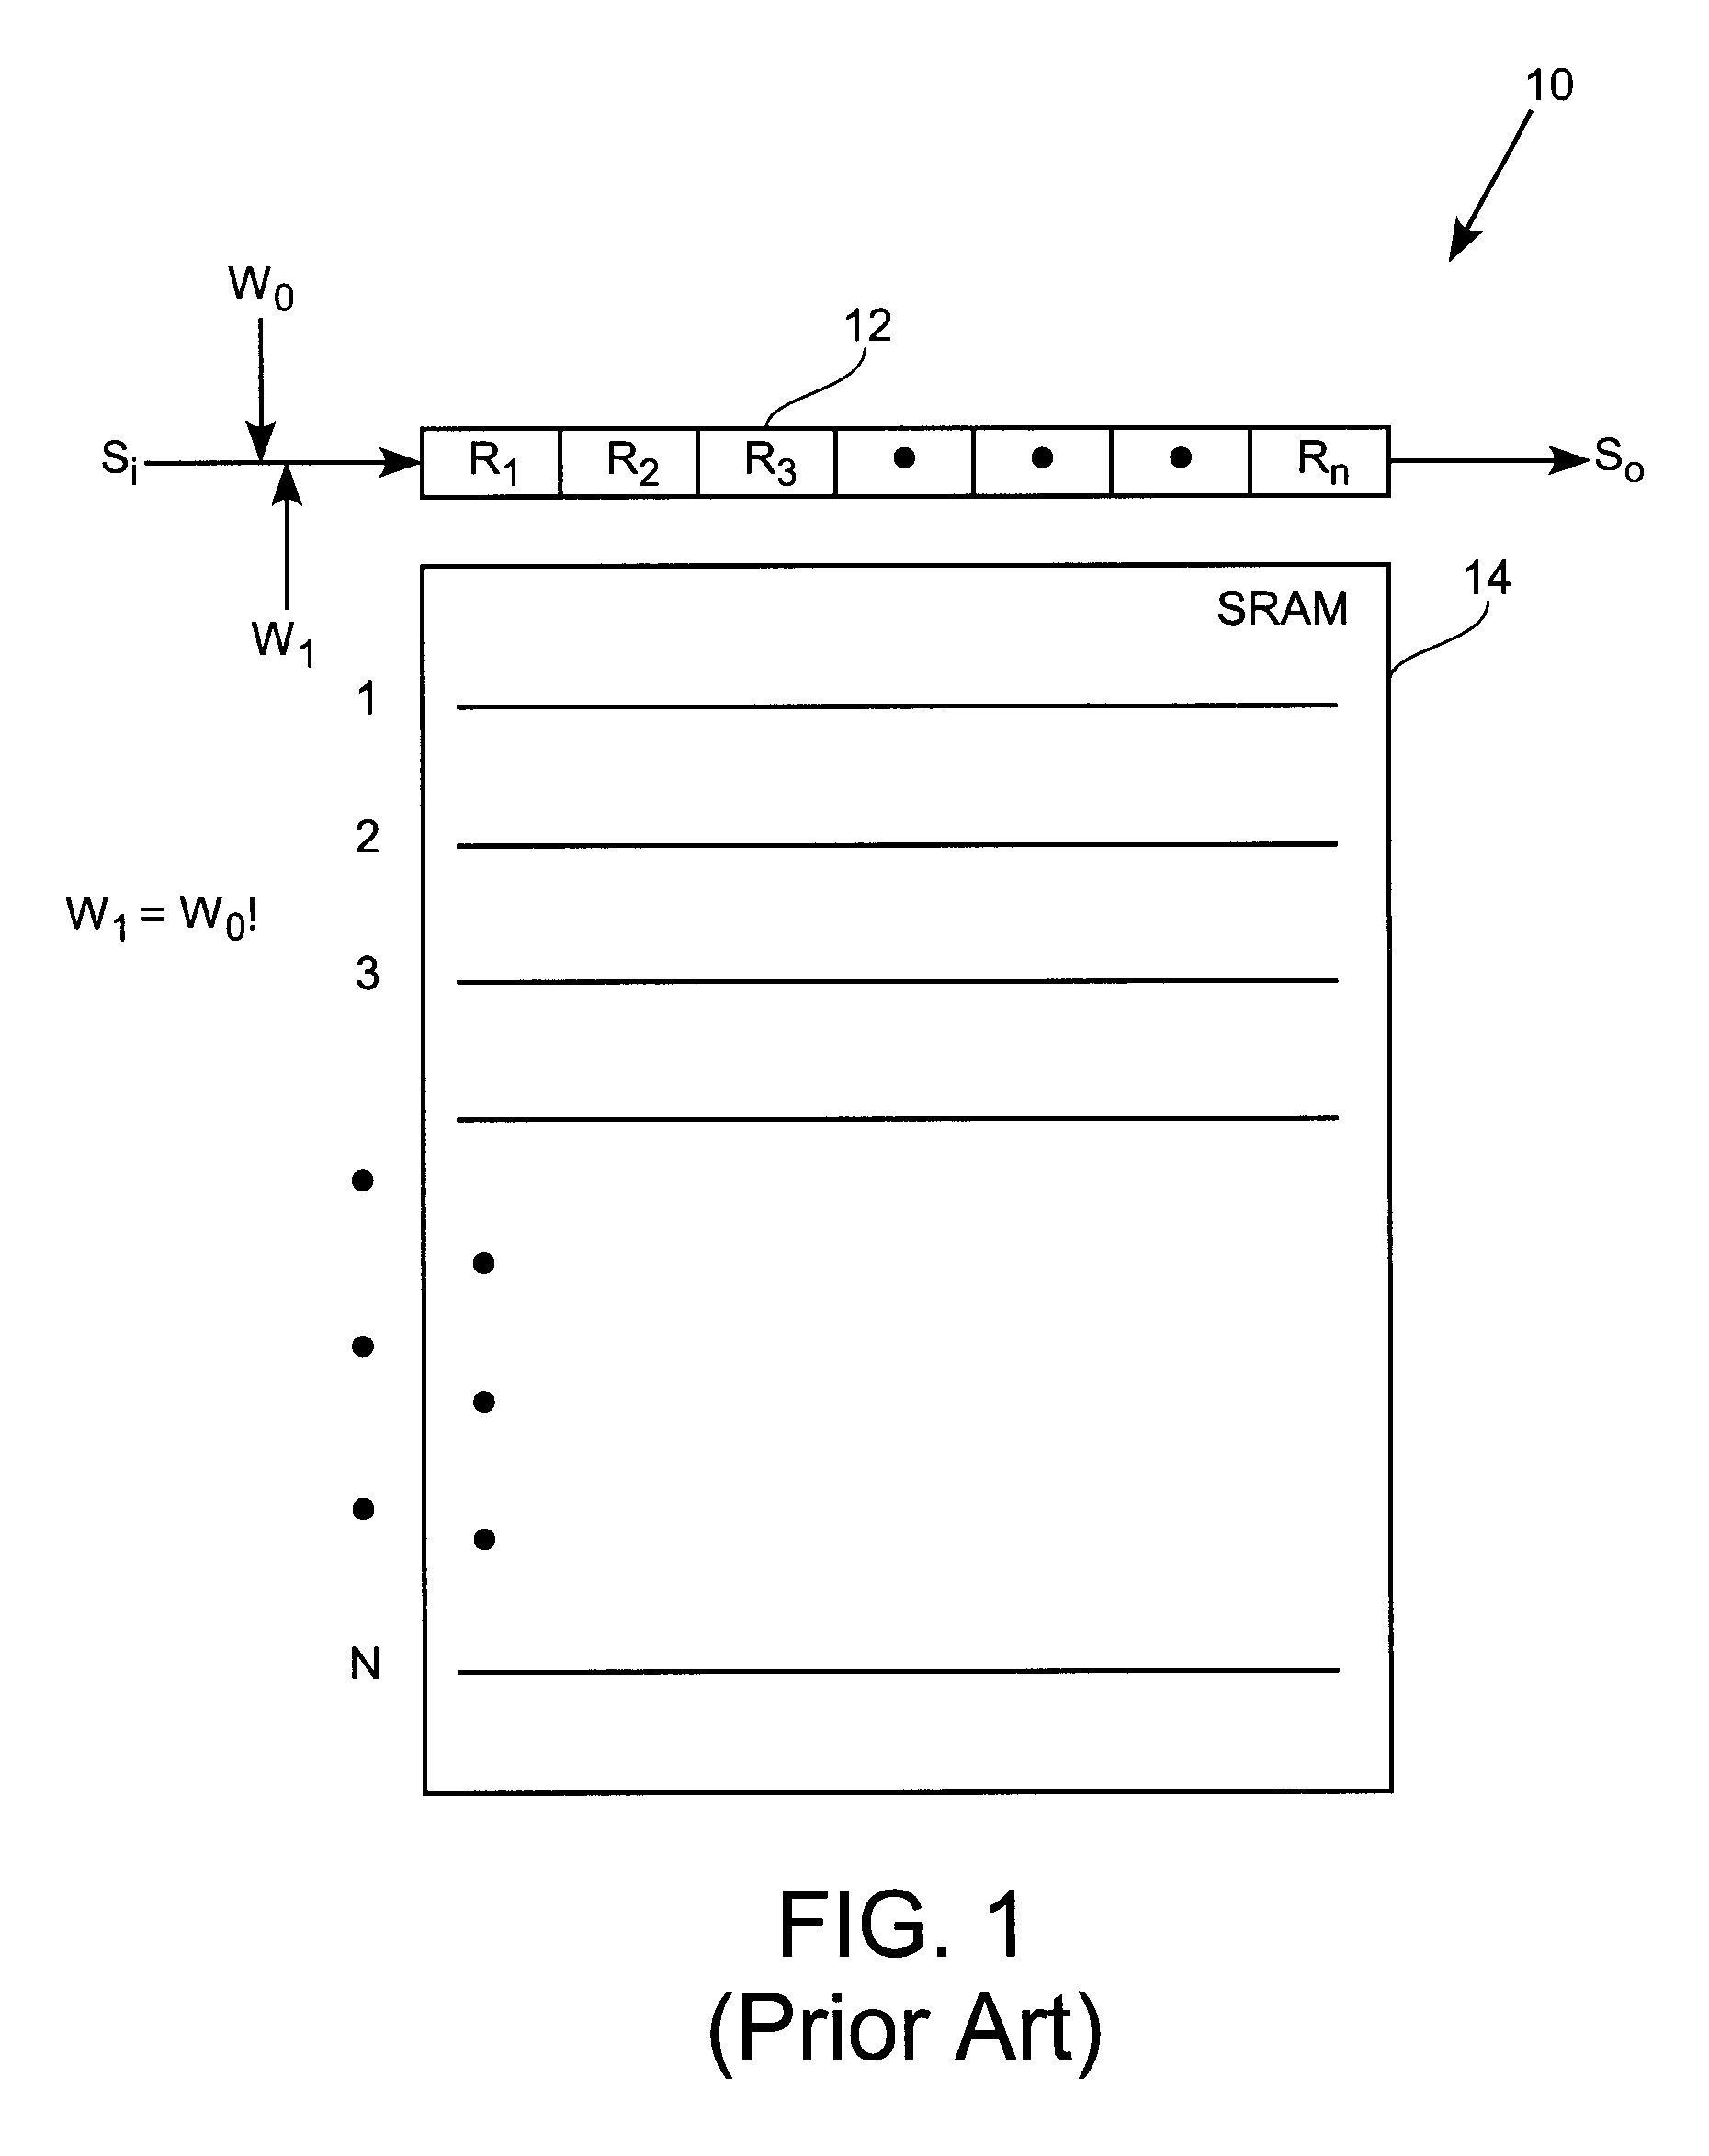 System and method for implementing memory testing in a SRAM unit